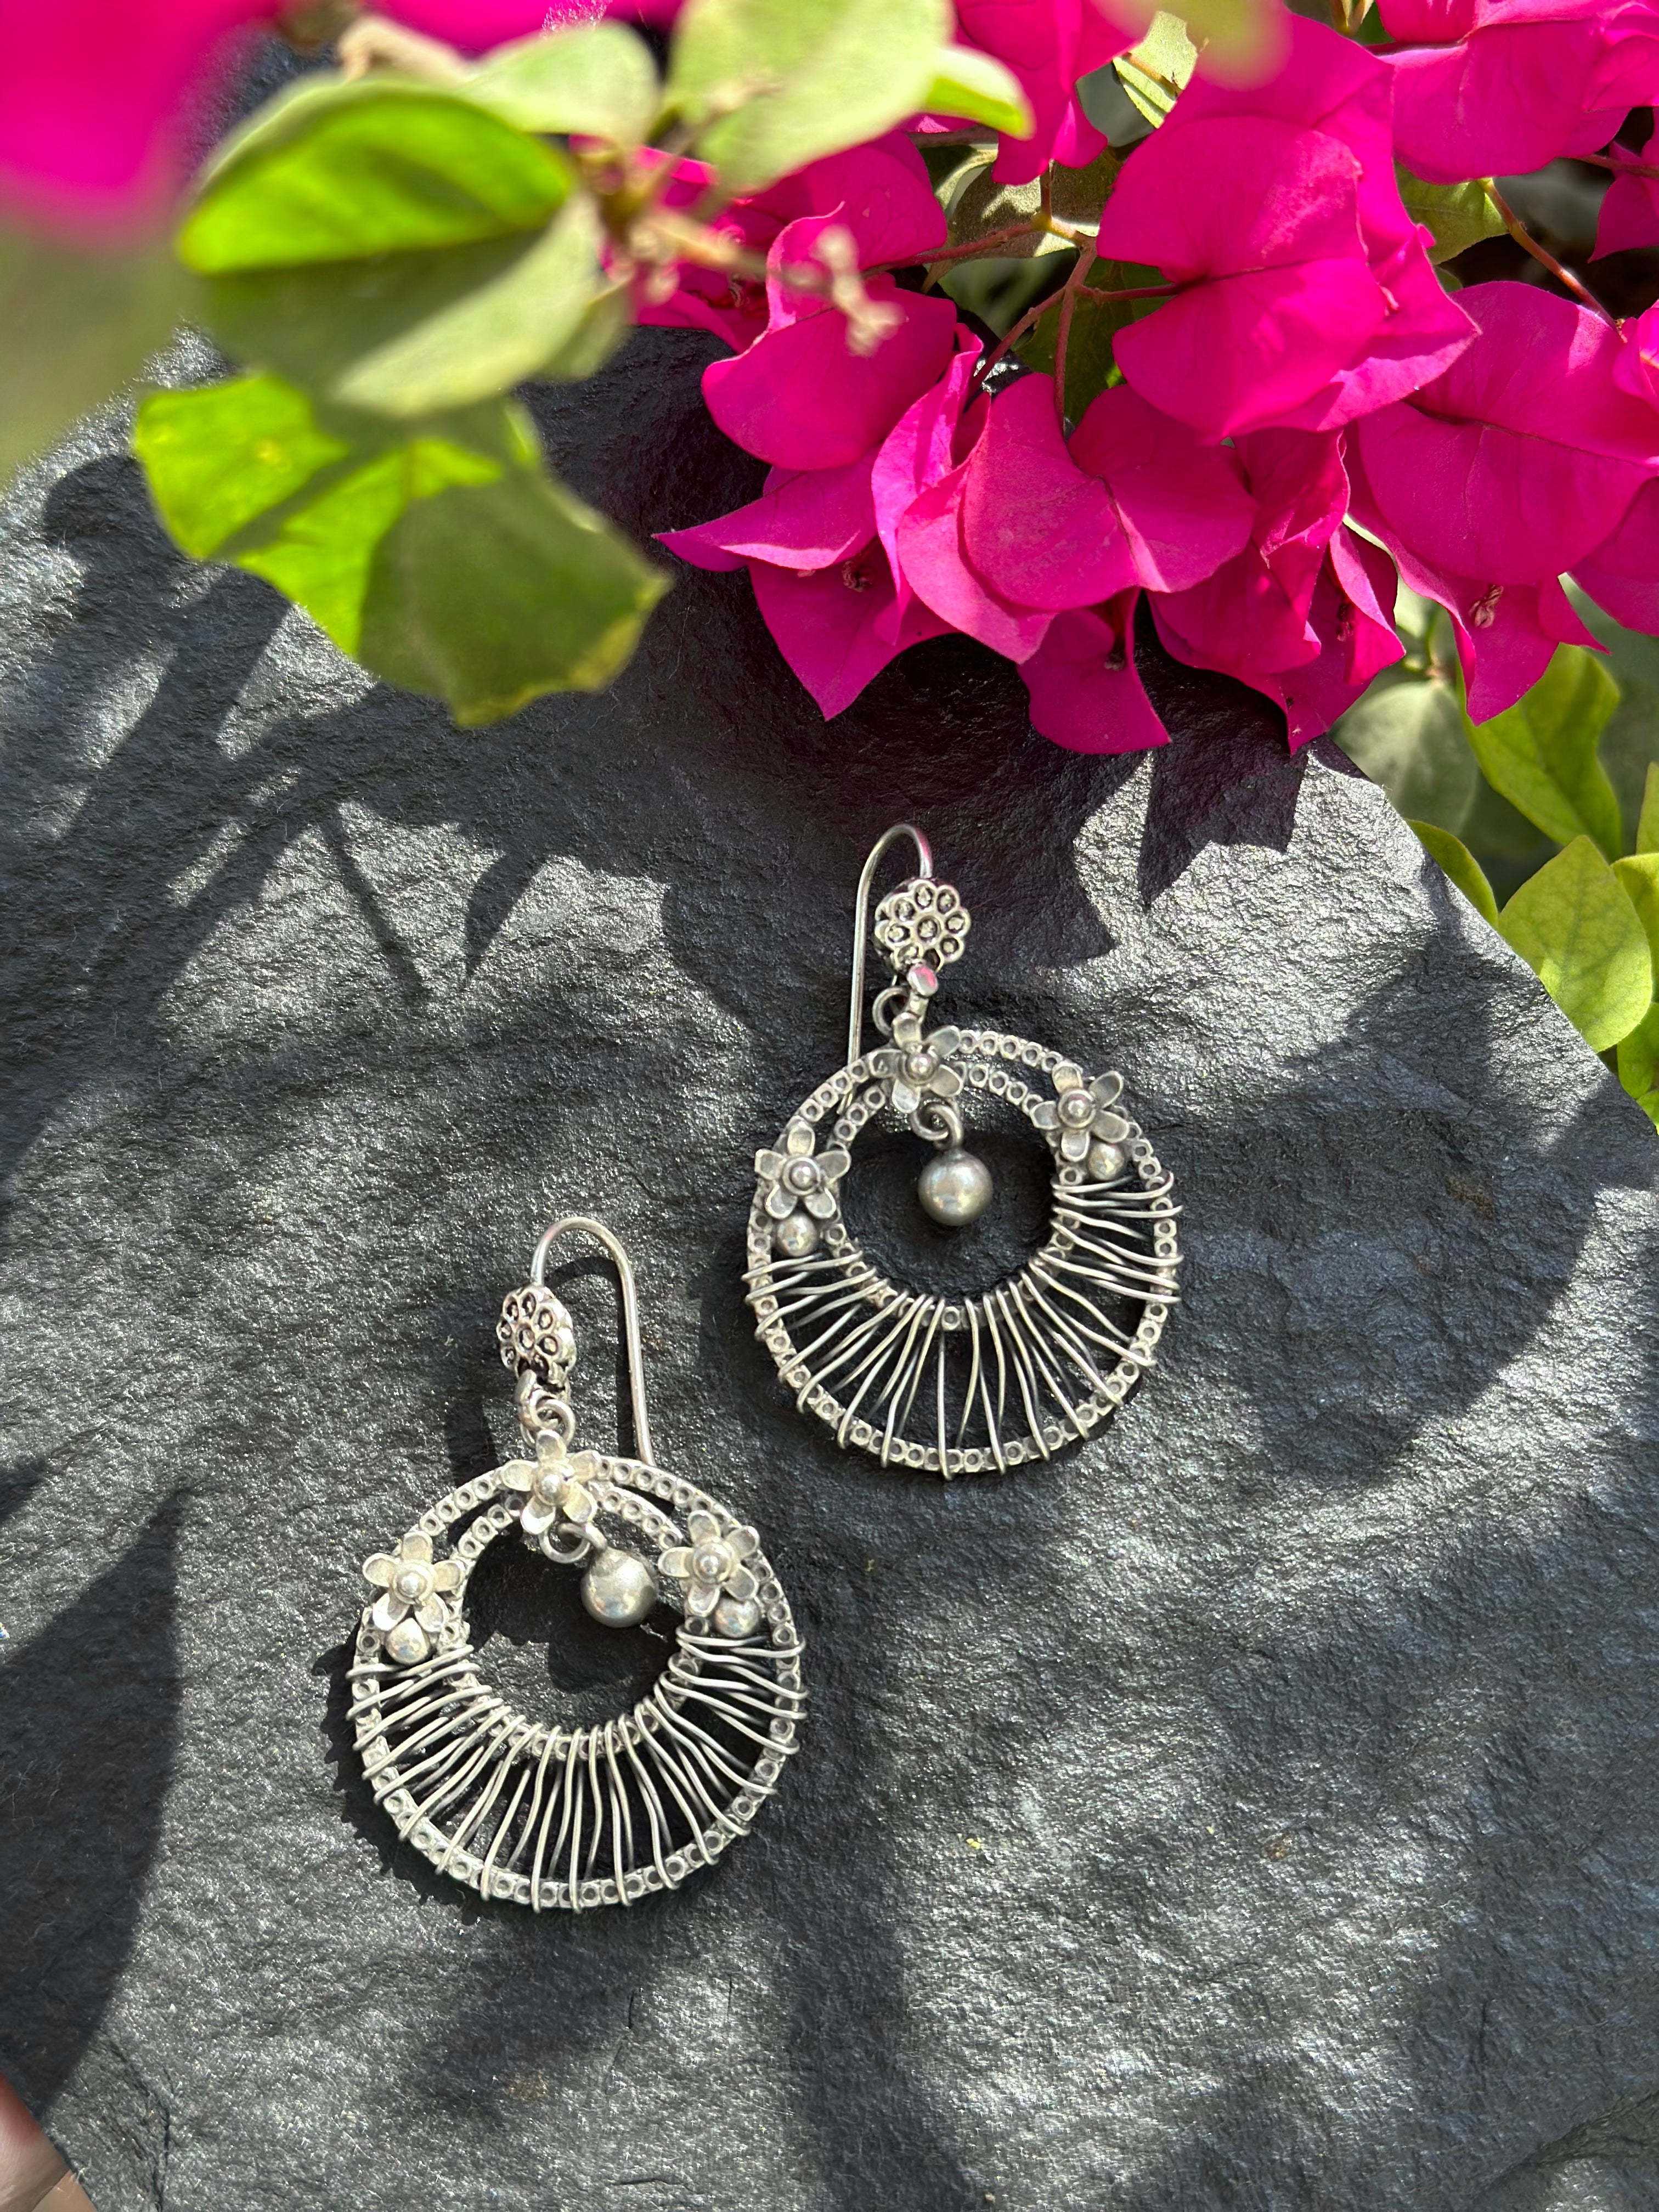 Stylish Handcrafted Silver Earrings